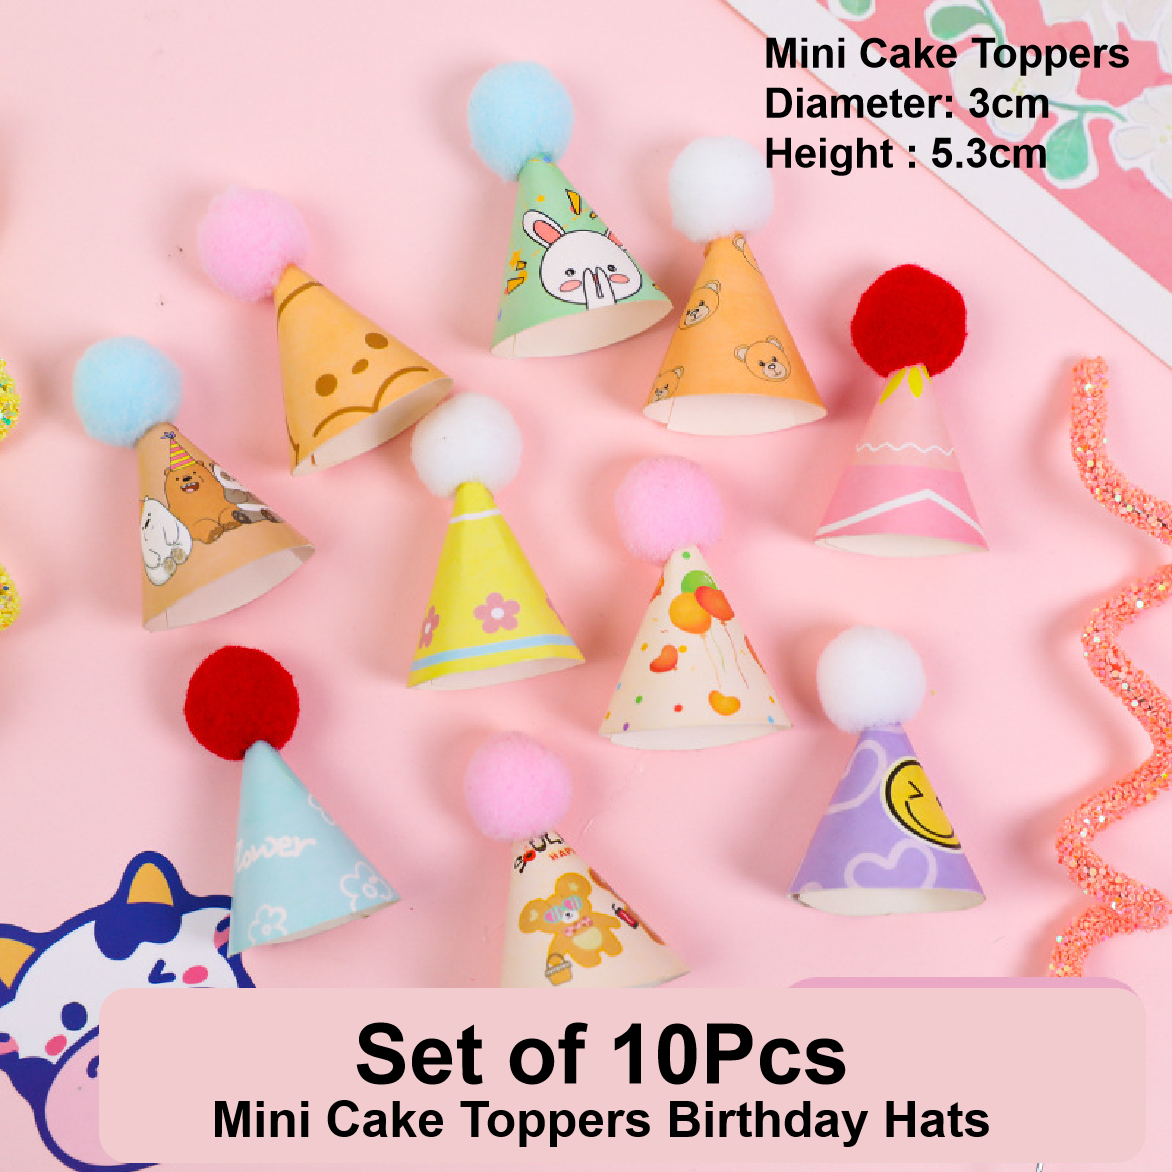 Cake Topper, Cupcake Decorations - Mini Cake Toppers Birthday Hats - Set of 10pcs